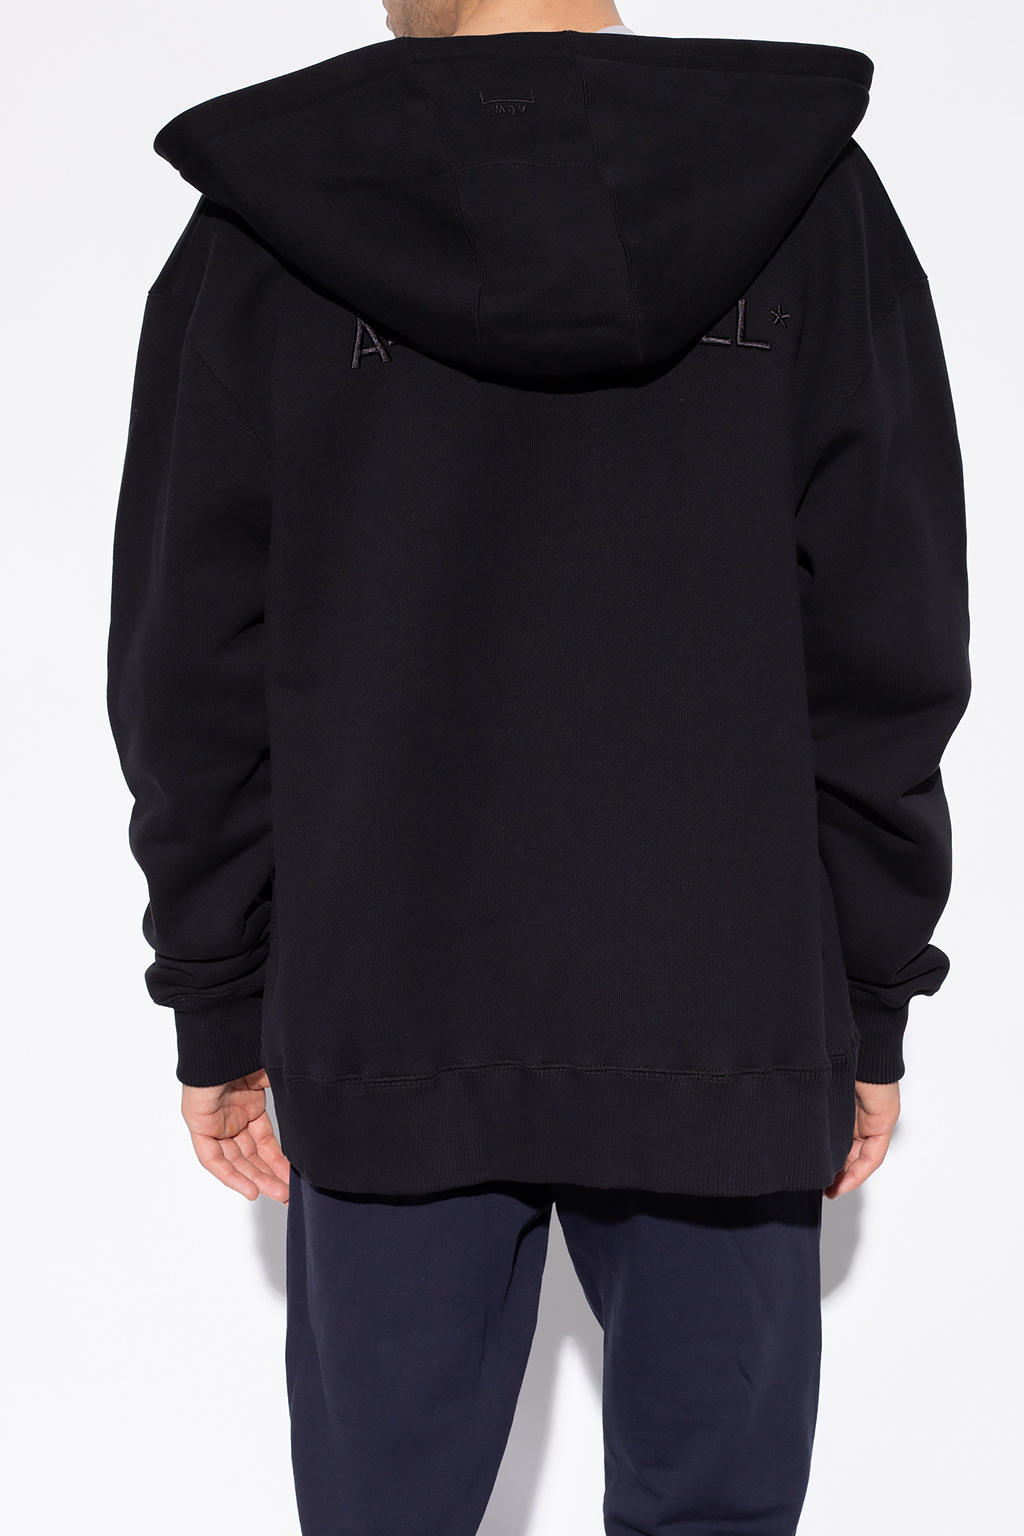 A-COLD-WALL* Logo-embroidered hoodie